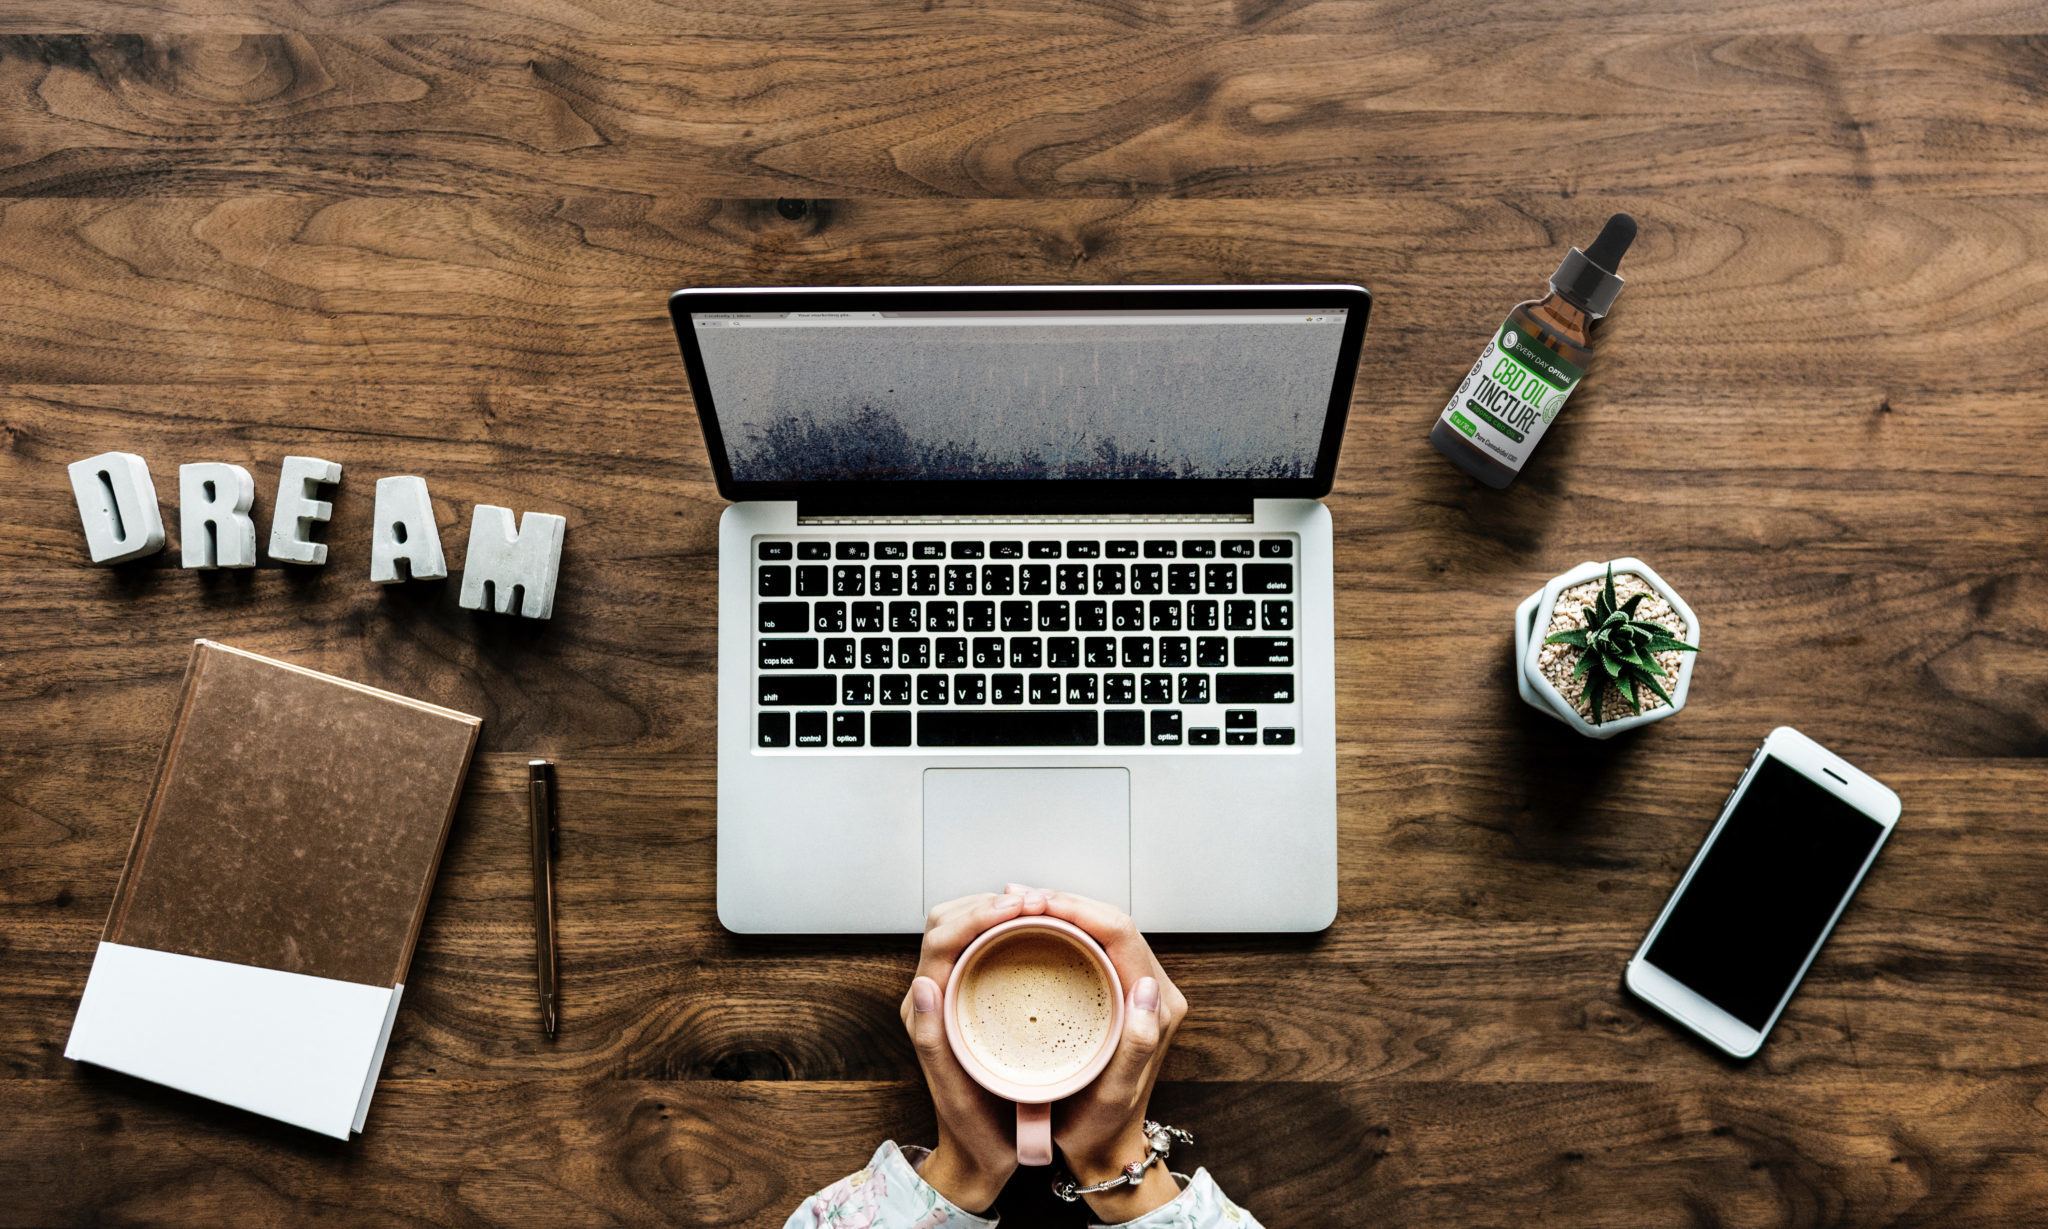 In this article, we compare the benefits of CBD vs CBN and explain how both can help us live better lives. A seated person cups a mug of coffee in their hands in front of a laptop. Arranged nearby are a small plant, a notepad, a smartphone, a bottle of Every Day Optimal CBD, and decorate letters spelling the word DREAM.